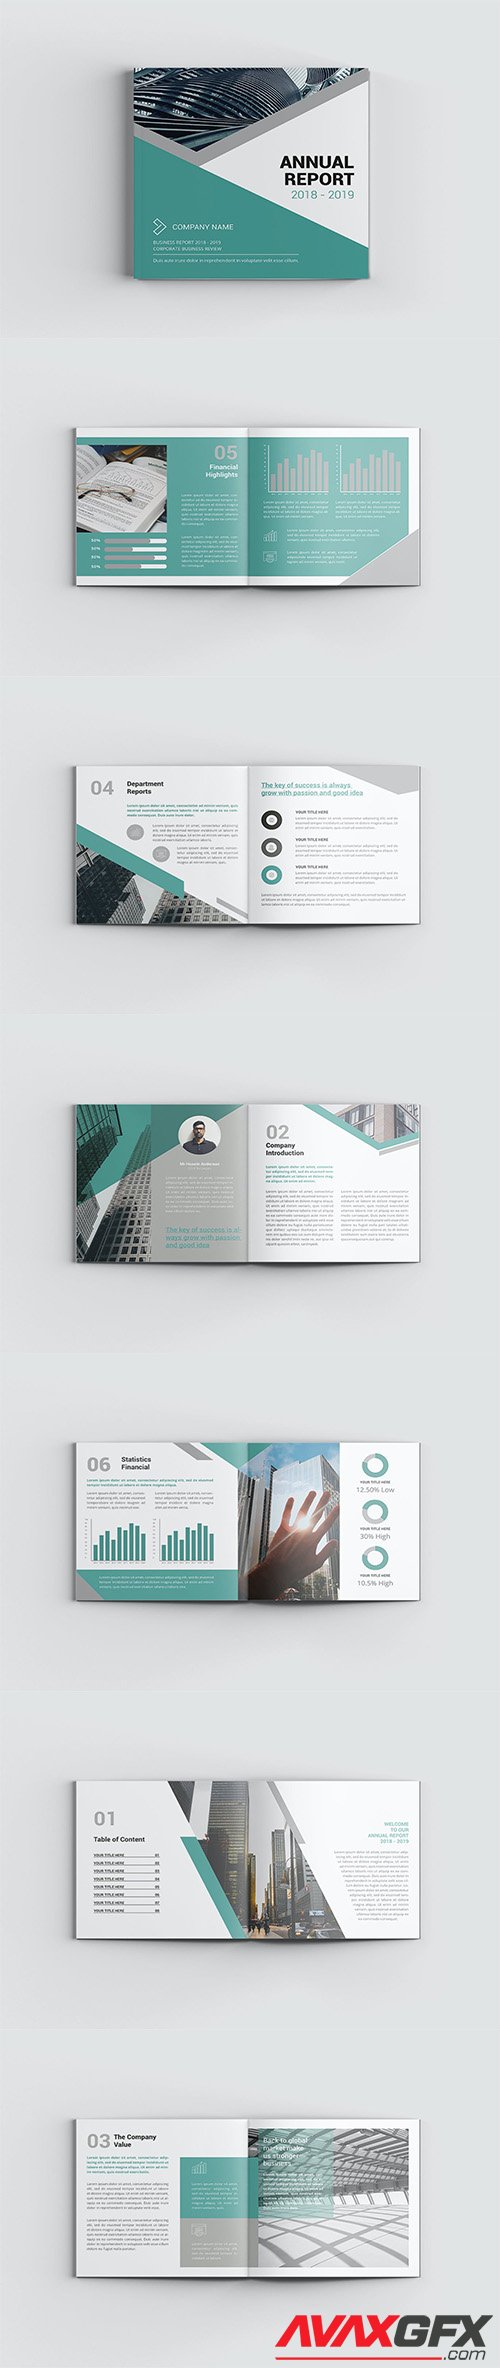 Contacts Square Annual Report